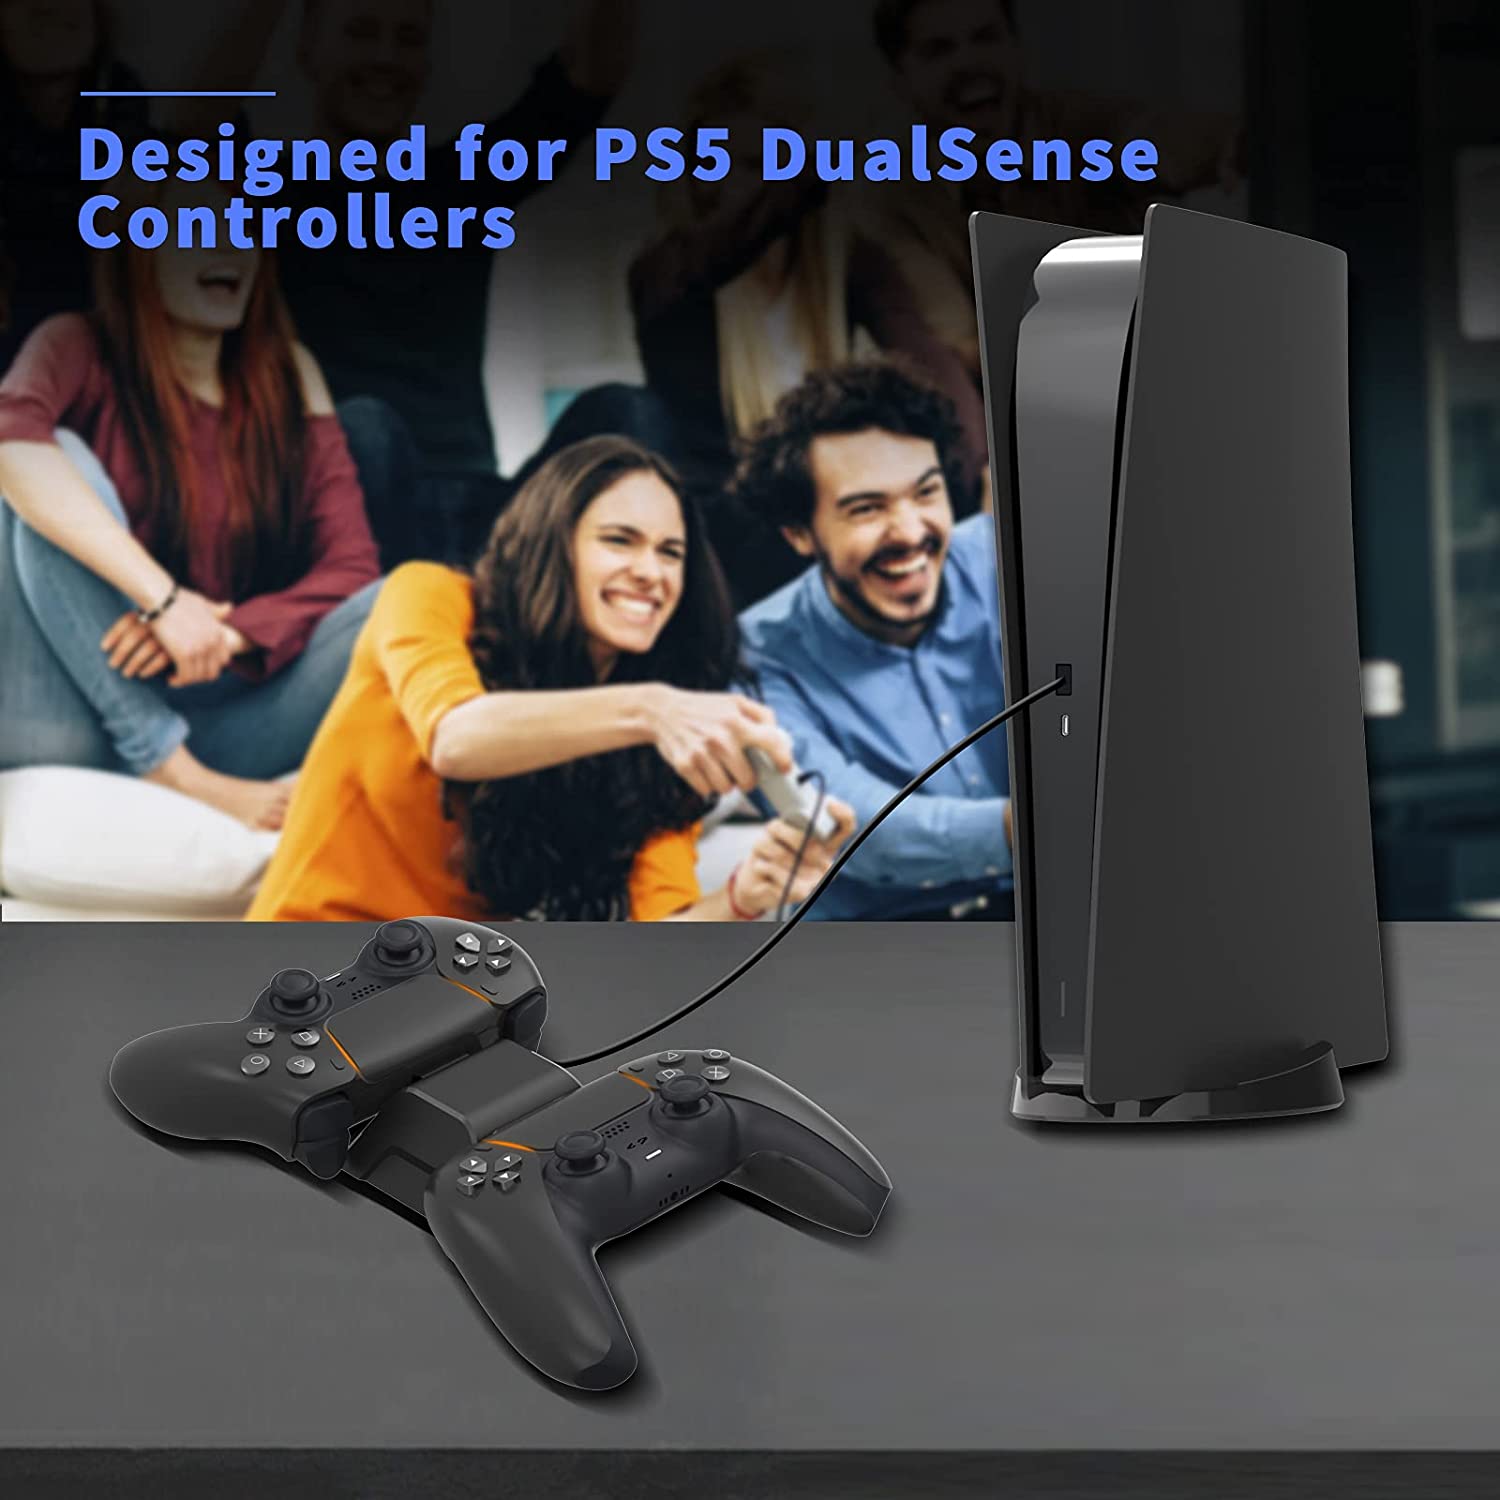 This charger is designed for PS5 controllers.